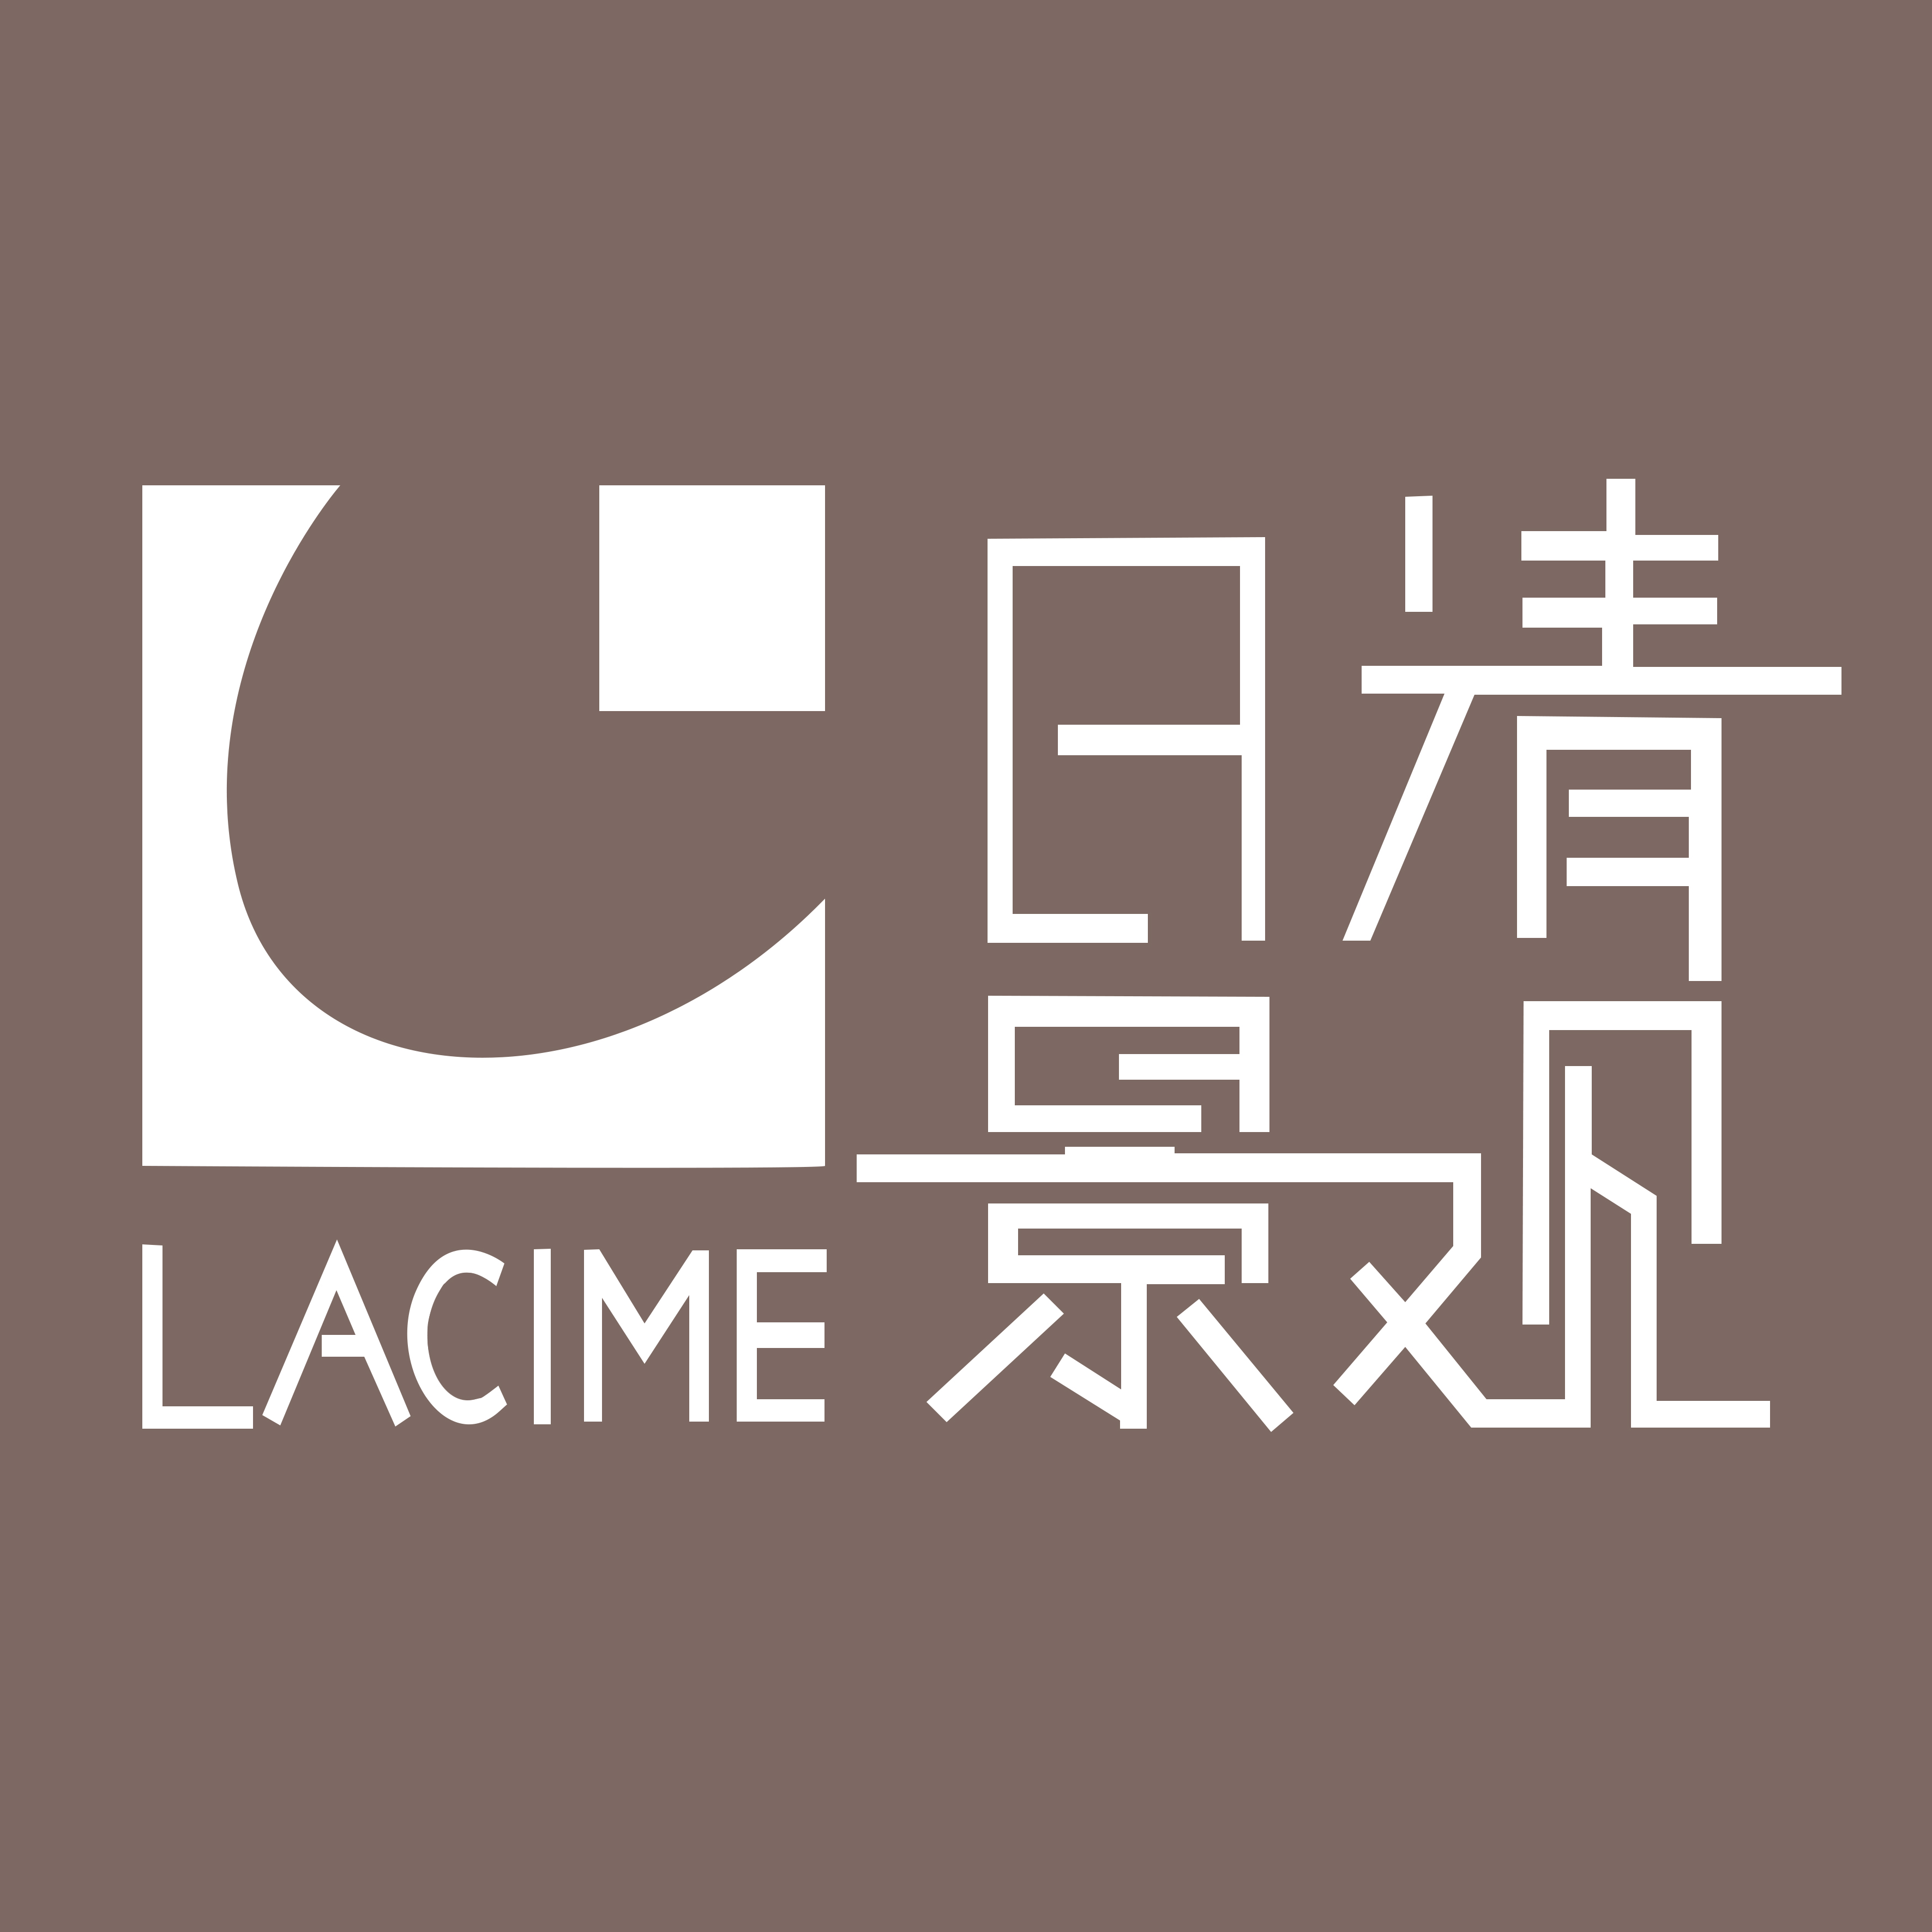 LACIME LANDSCAPING